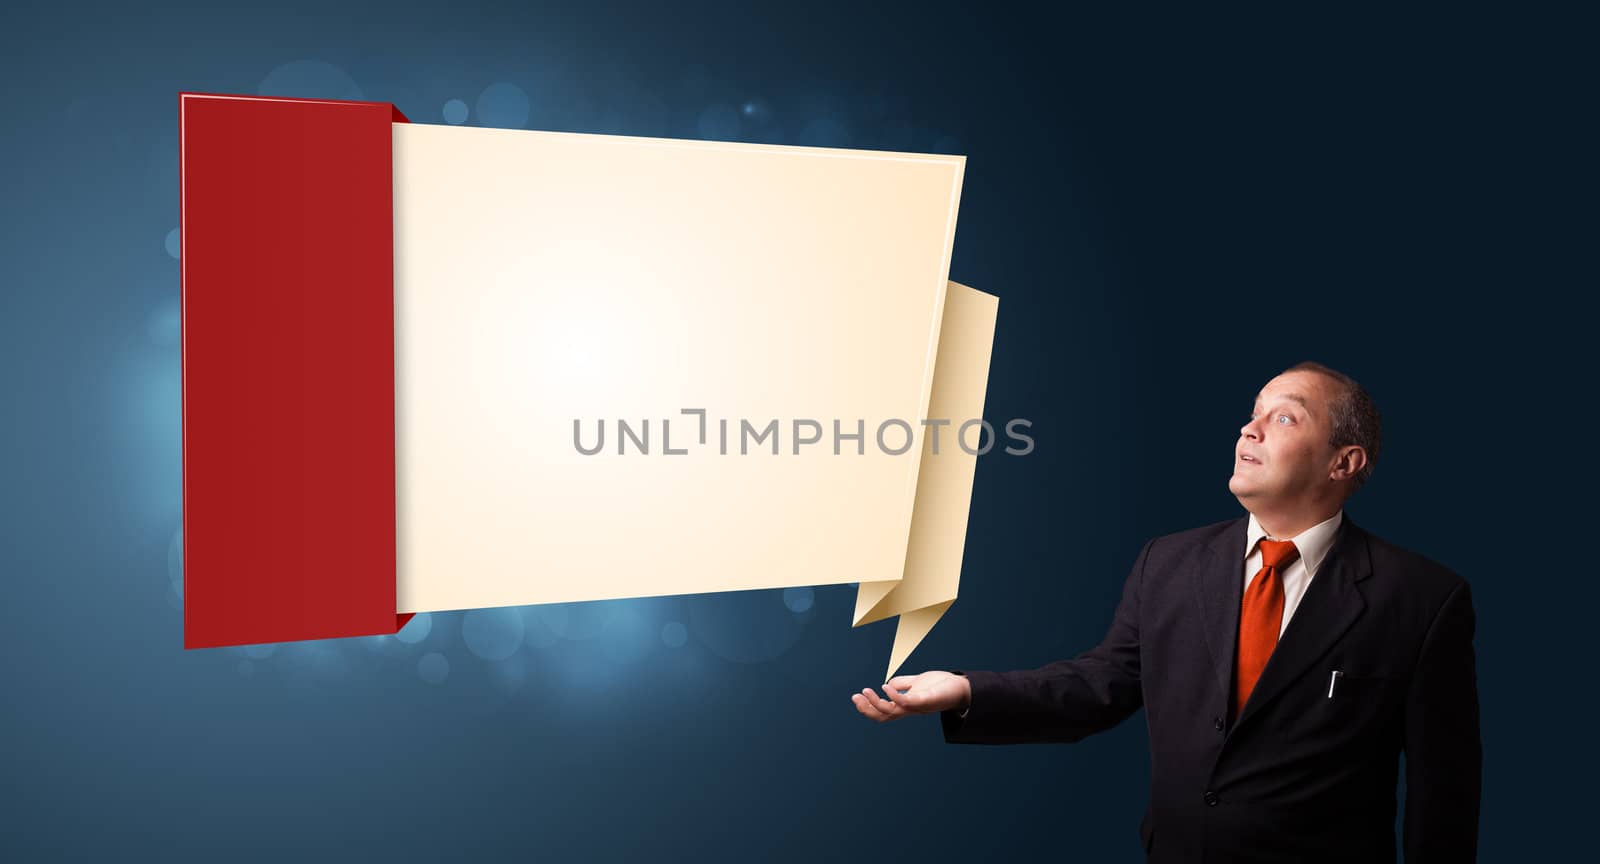 businessman in suit presenting modern origami copy space